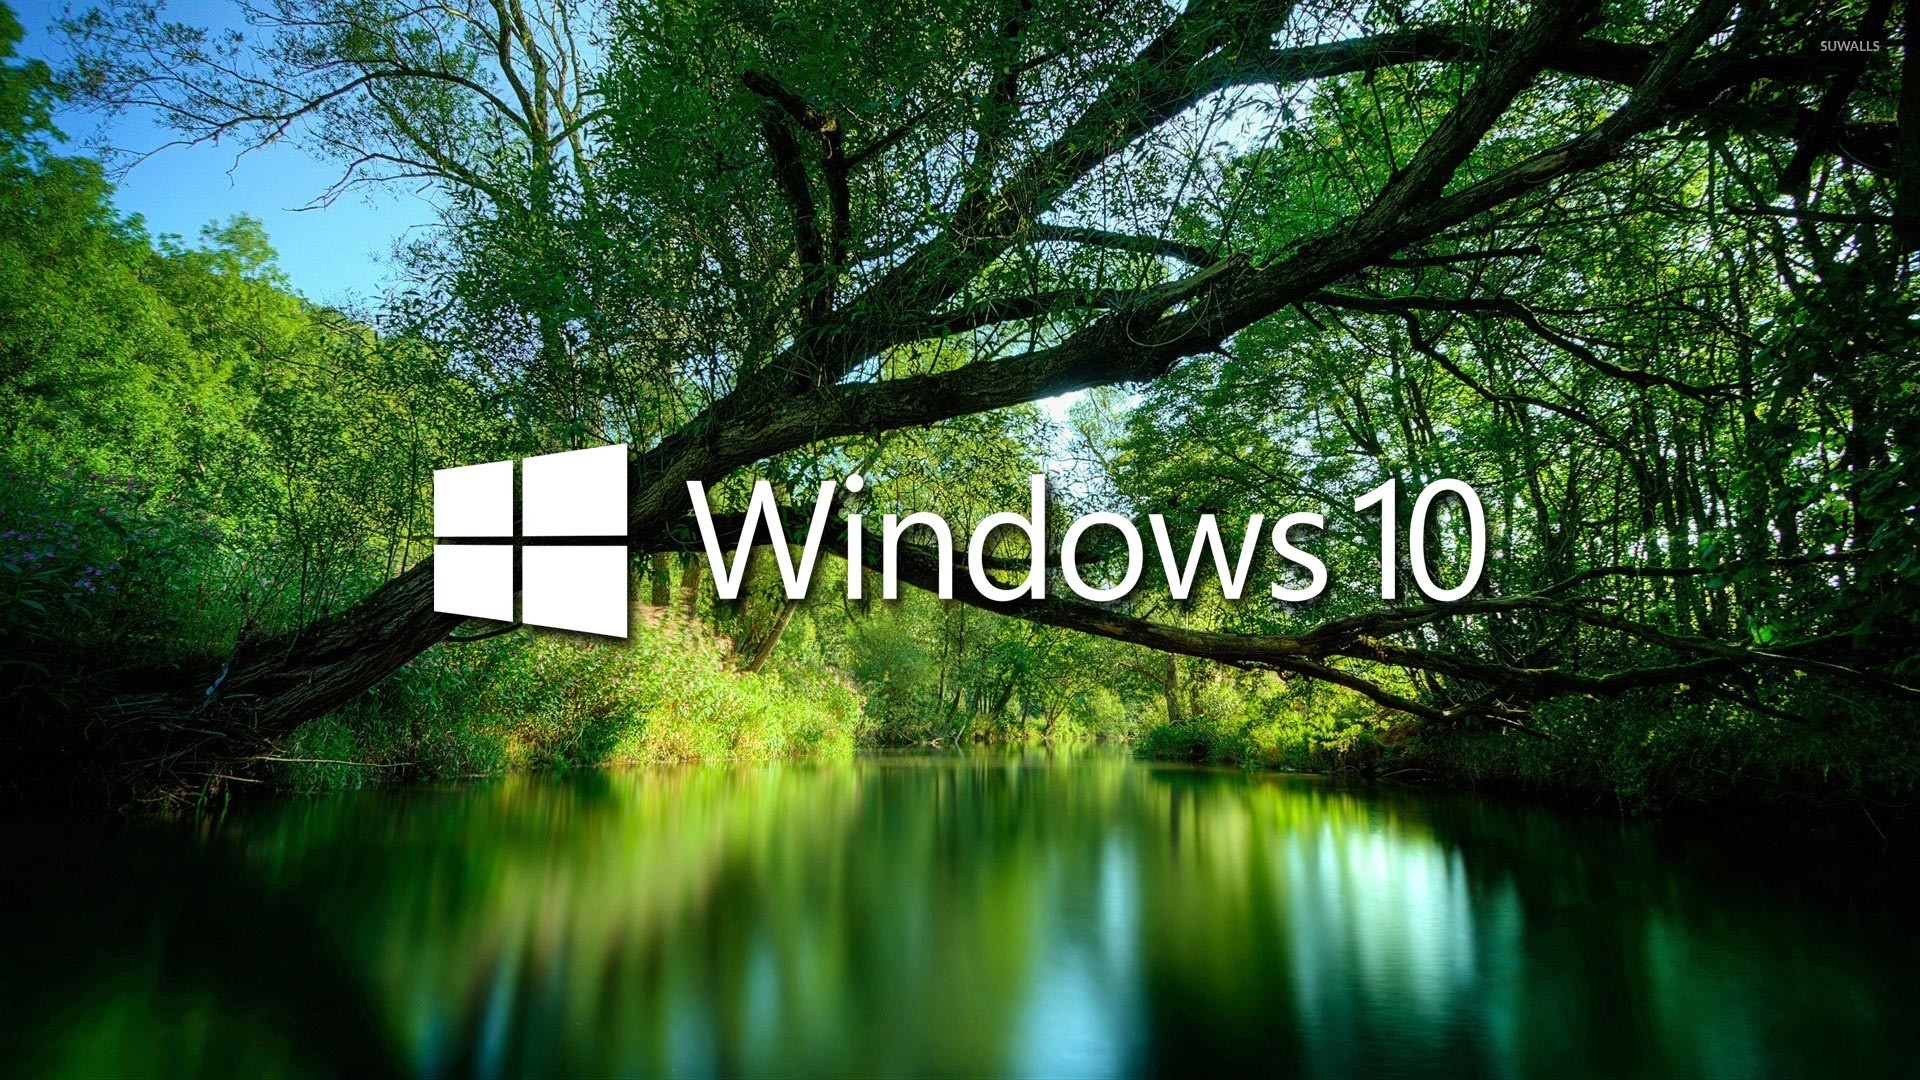 Windows 10 Wallpapers 1920x1080 (74+ images)